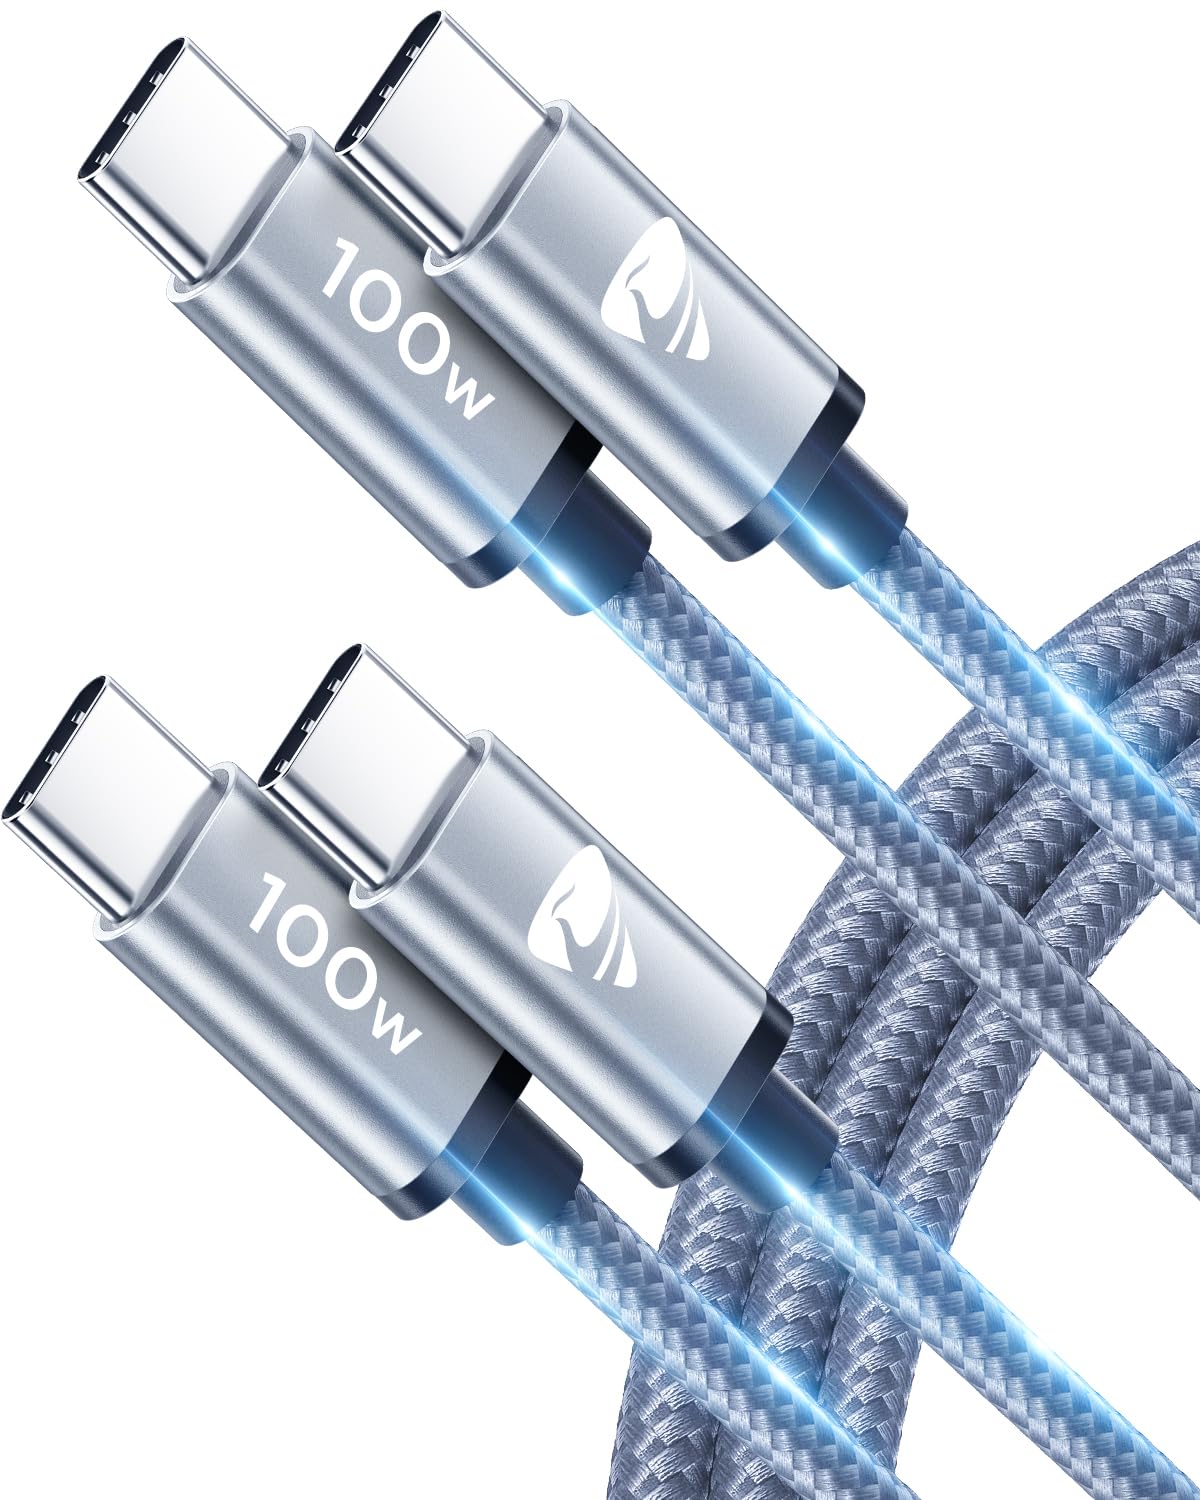 2-Pack 6' Aioneus USB C to C 100W 5A charging cables $5 ($2.50 ea) + Free Prime Shipping $4.89